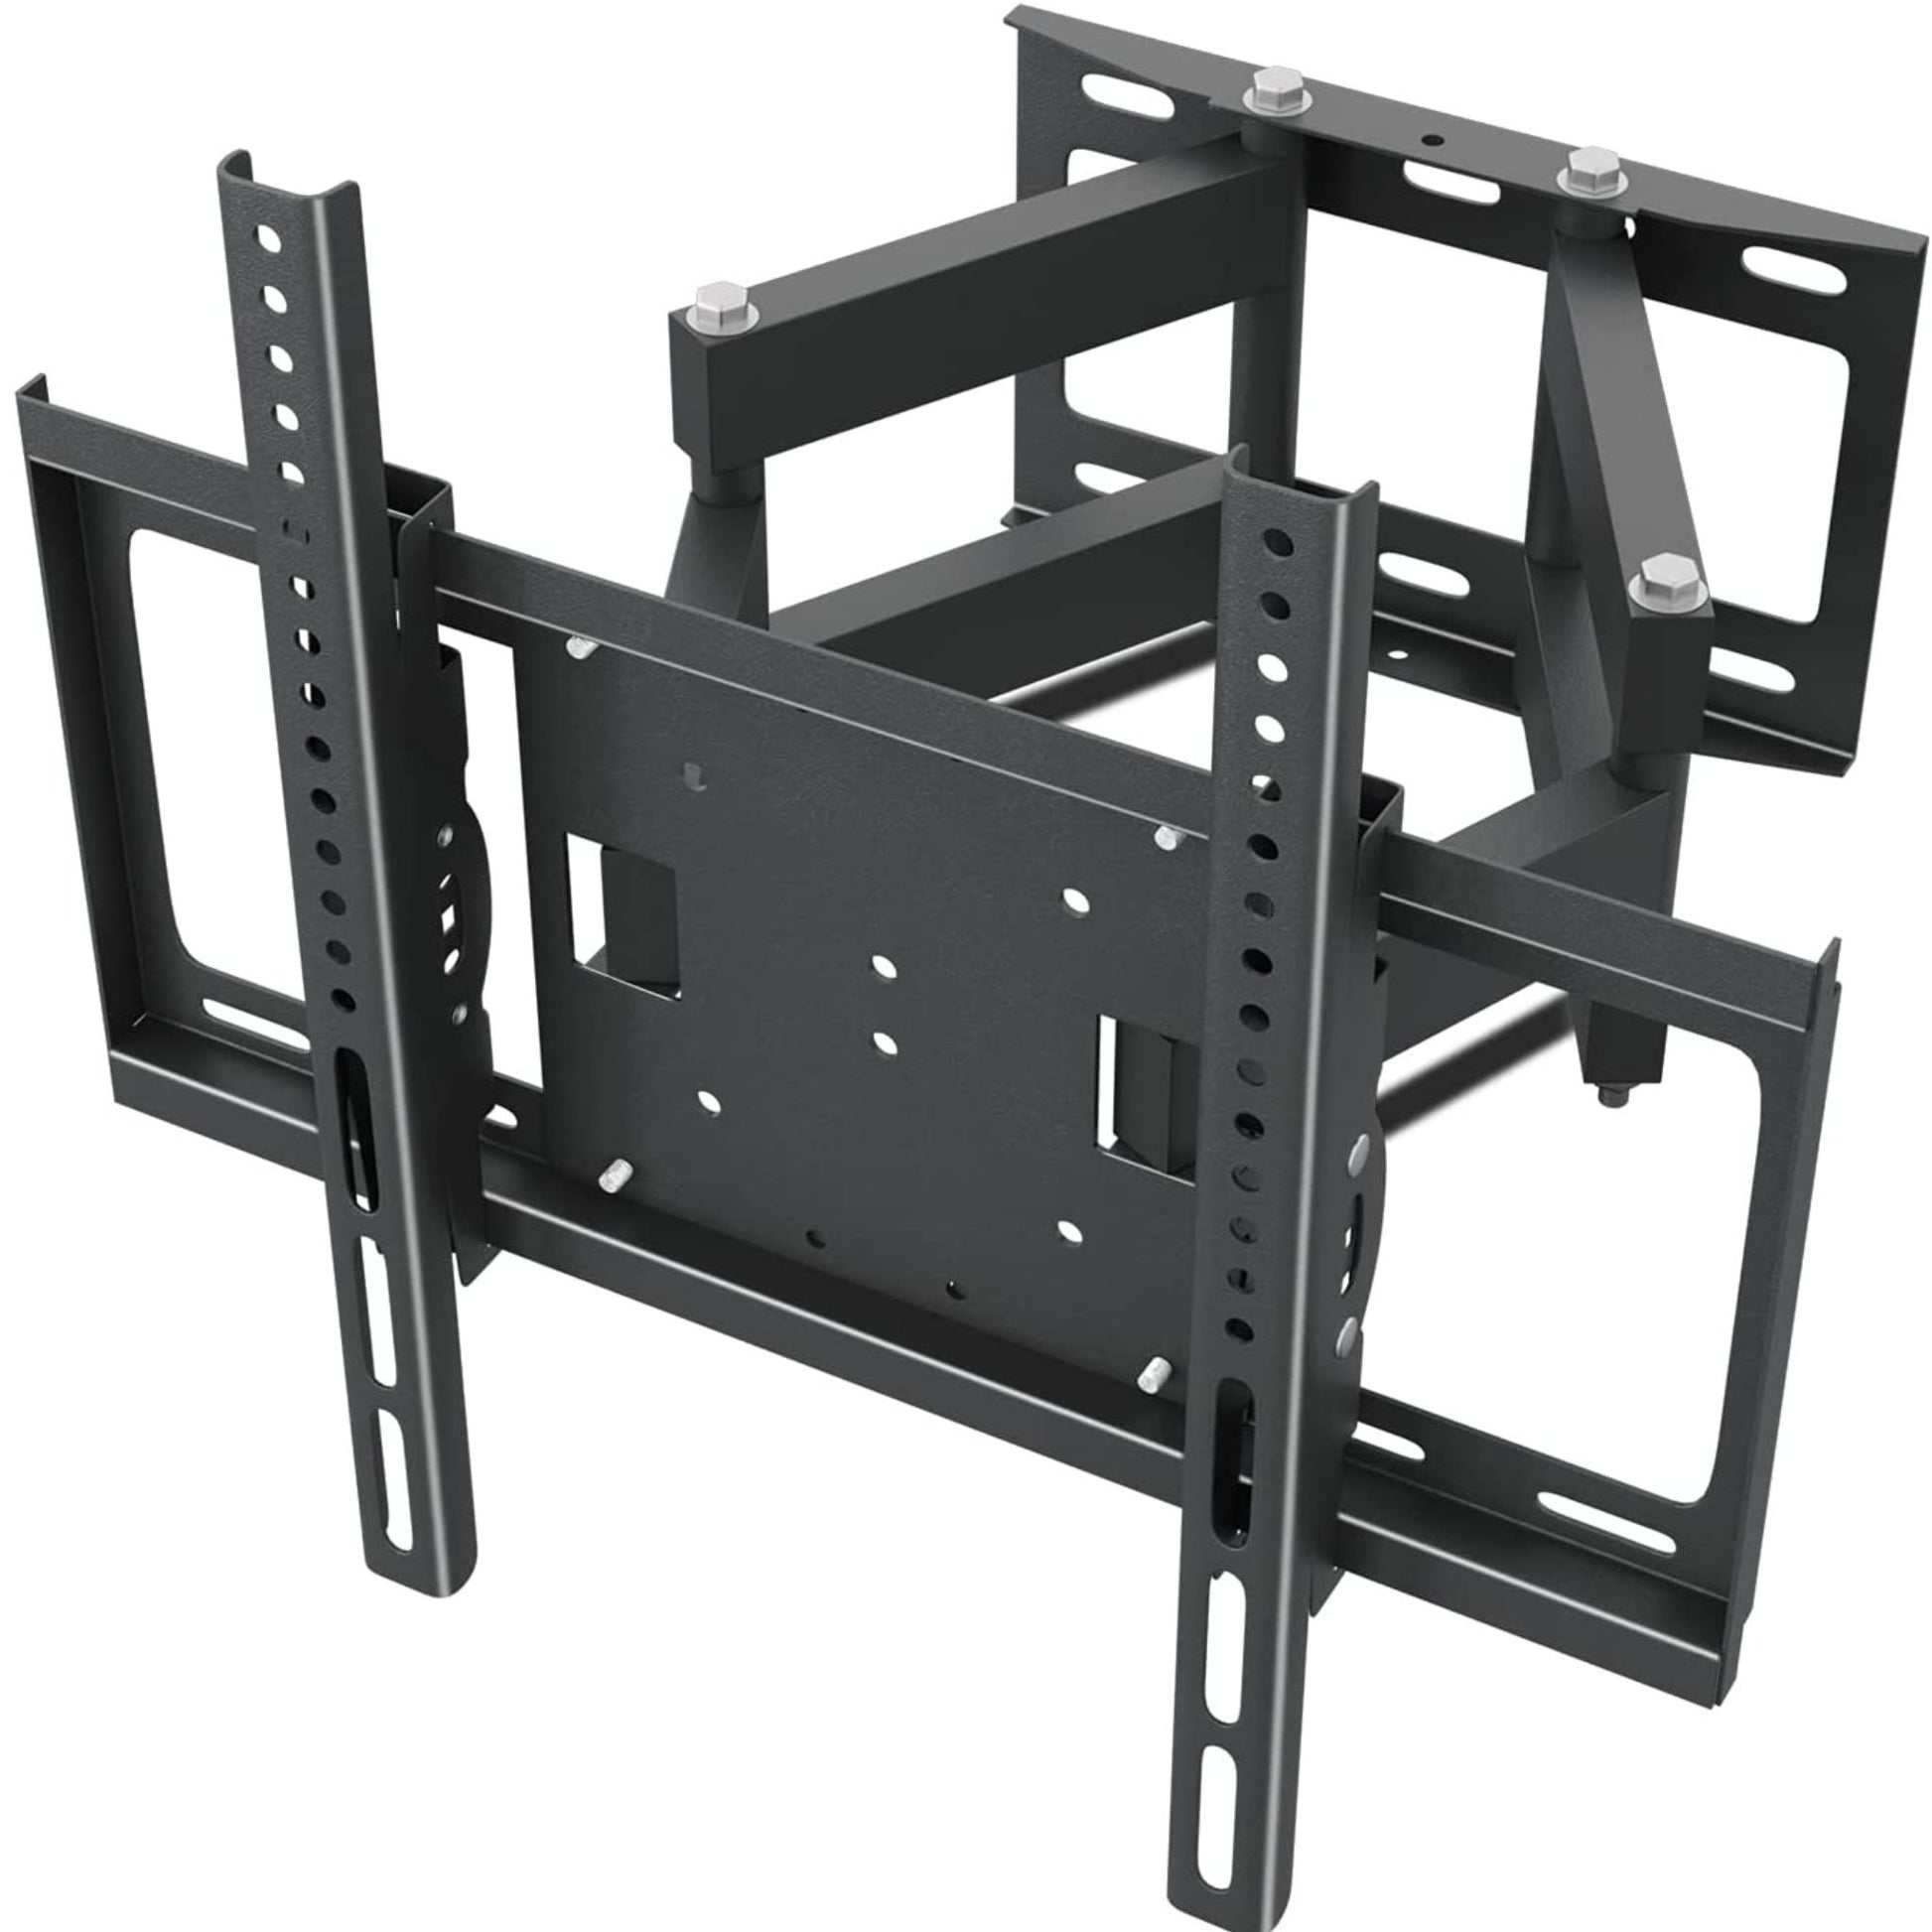 Star Gold Full Motion Movable TV Wall Bracket Mount for Most 32-75 Inches LED LCD Monitors and TV, SG-823MTB